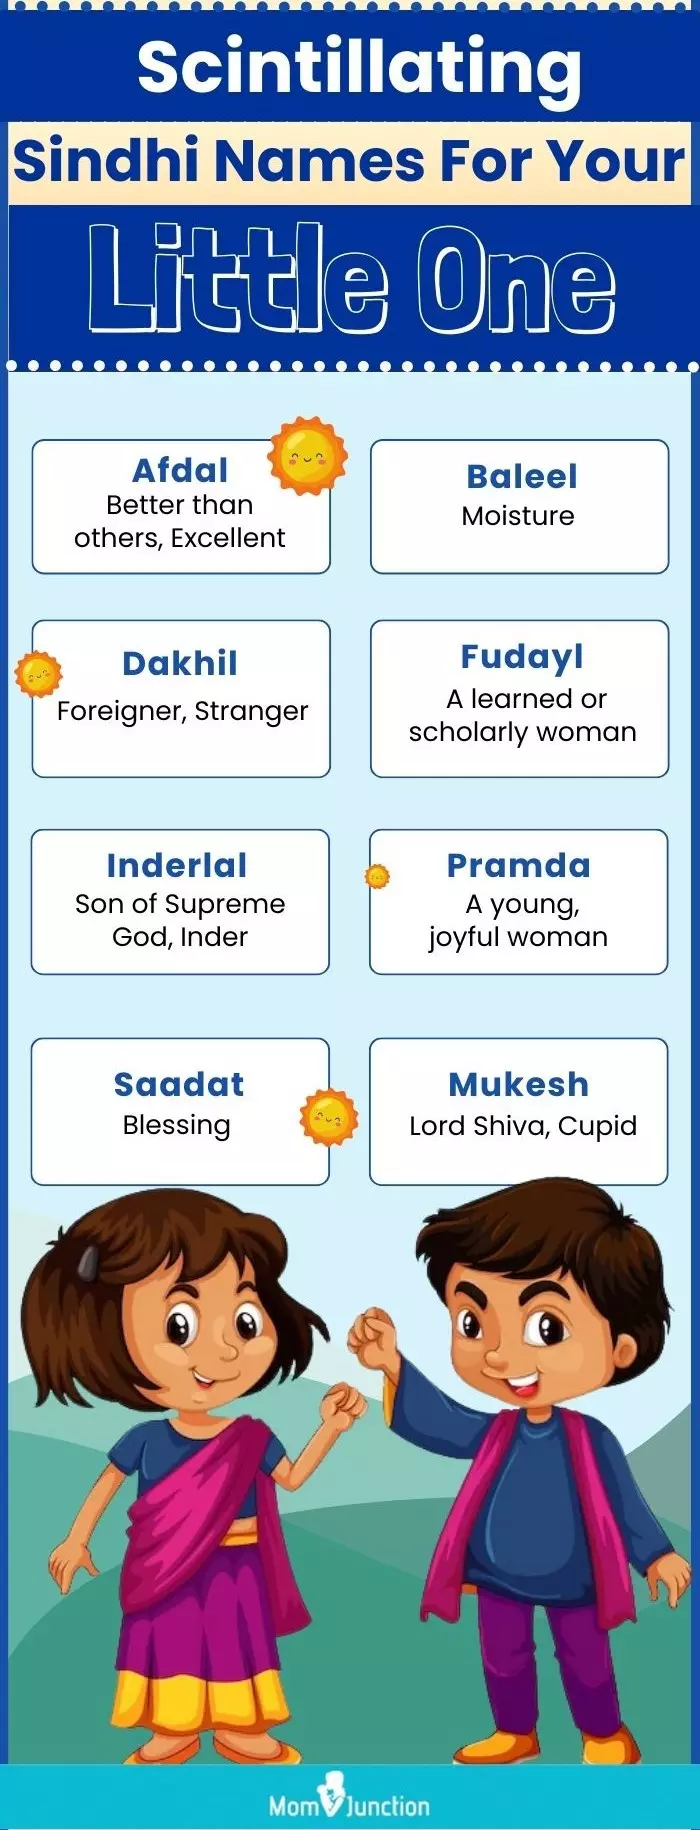 scintillating sindhi names for your little one (infographic)